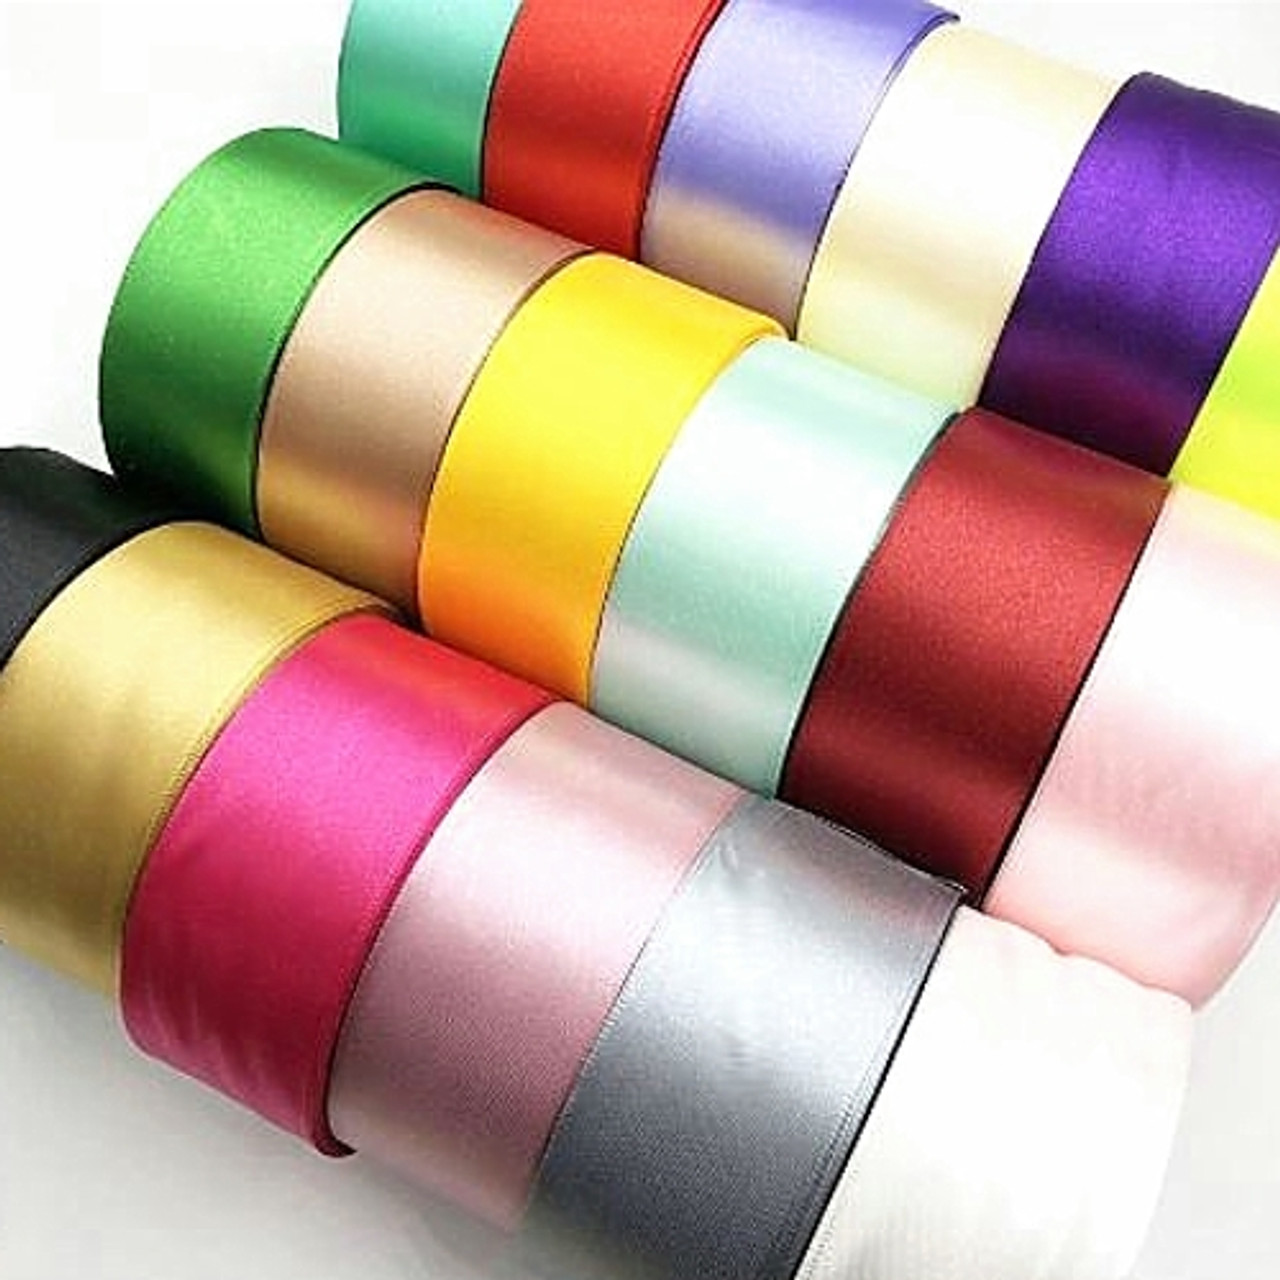 Satin Ribbon, Double-Faced 1-1/2 inch